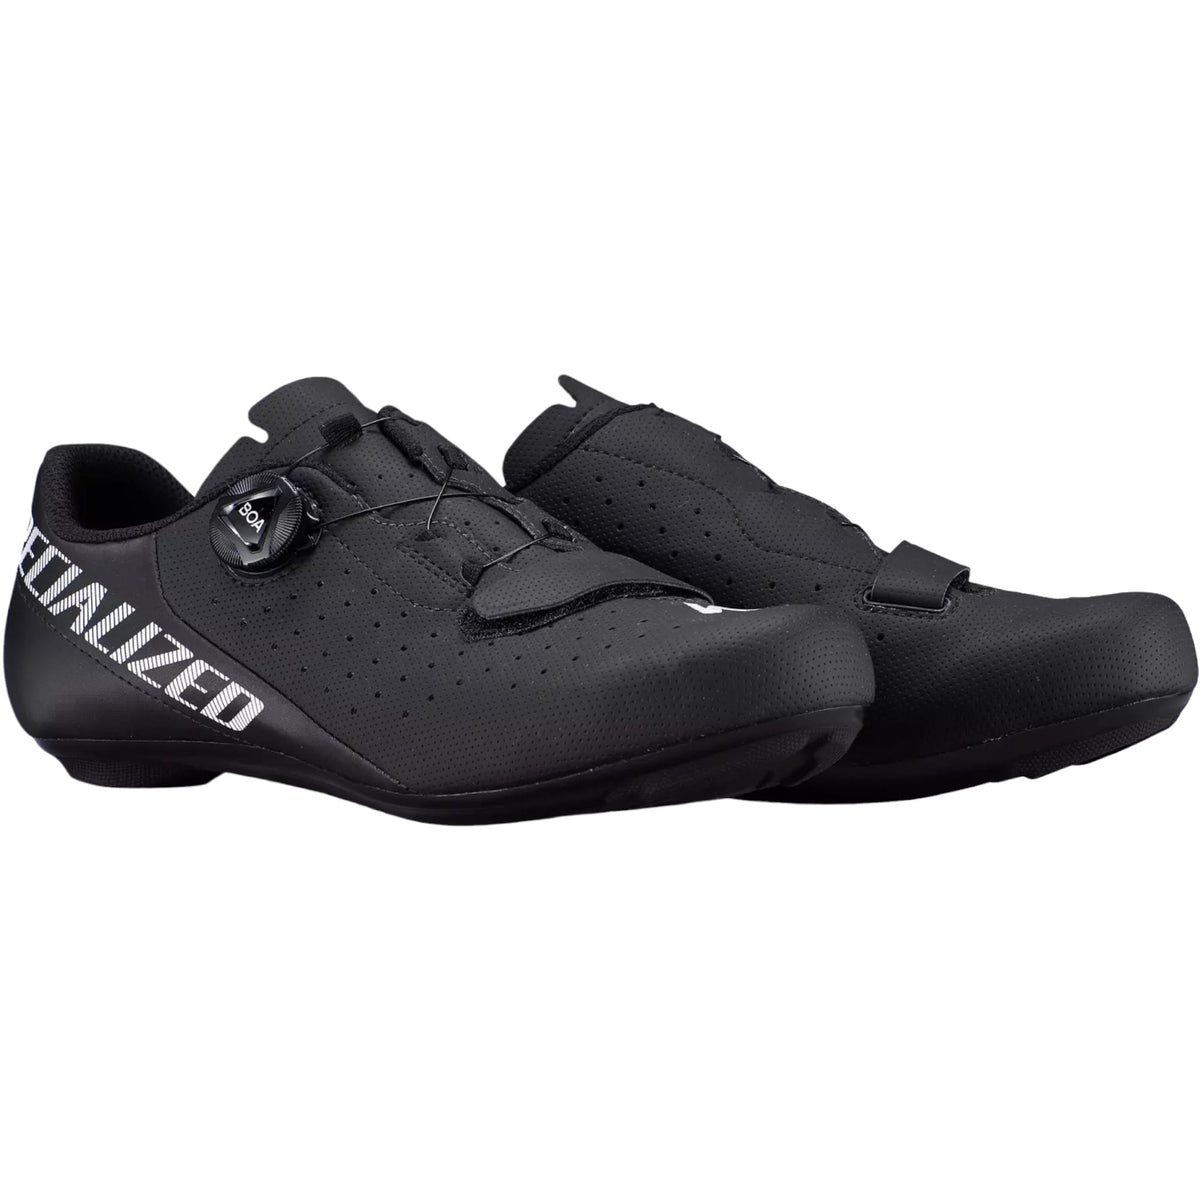 Torch 1.0 Adult Road Bike Shoes